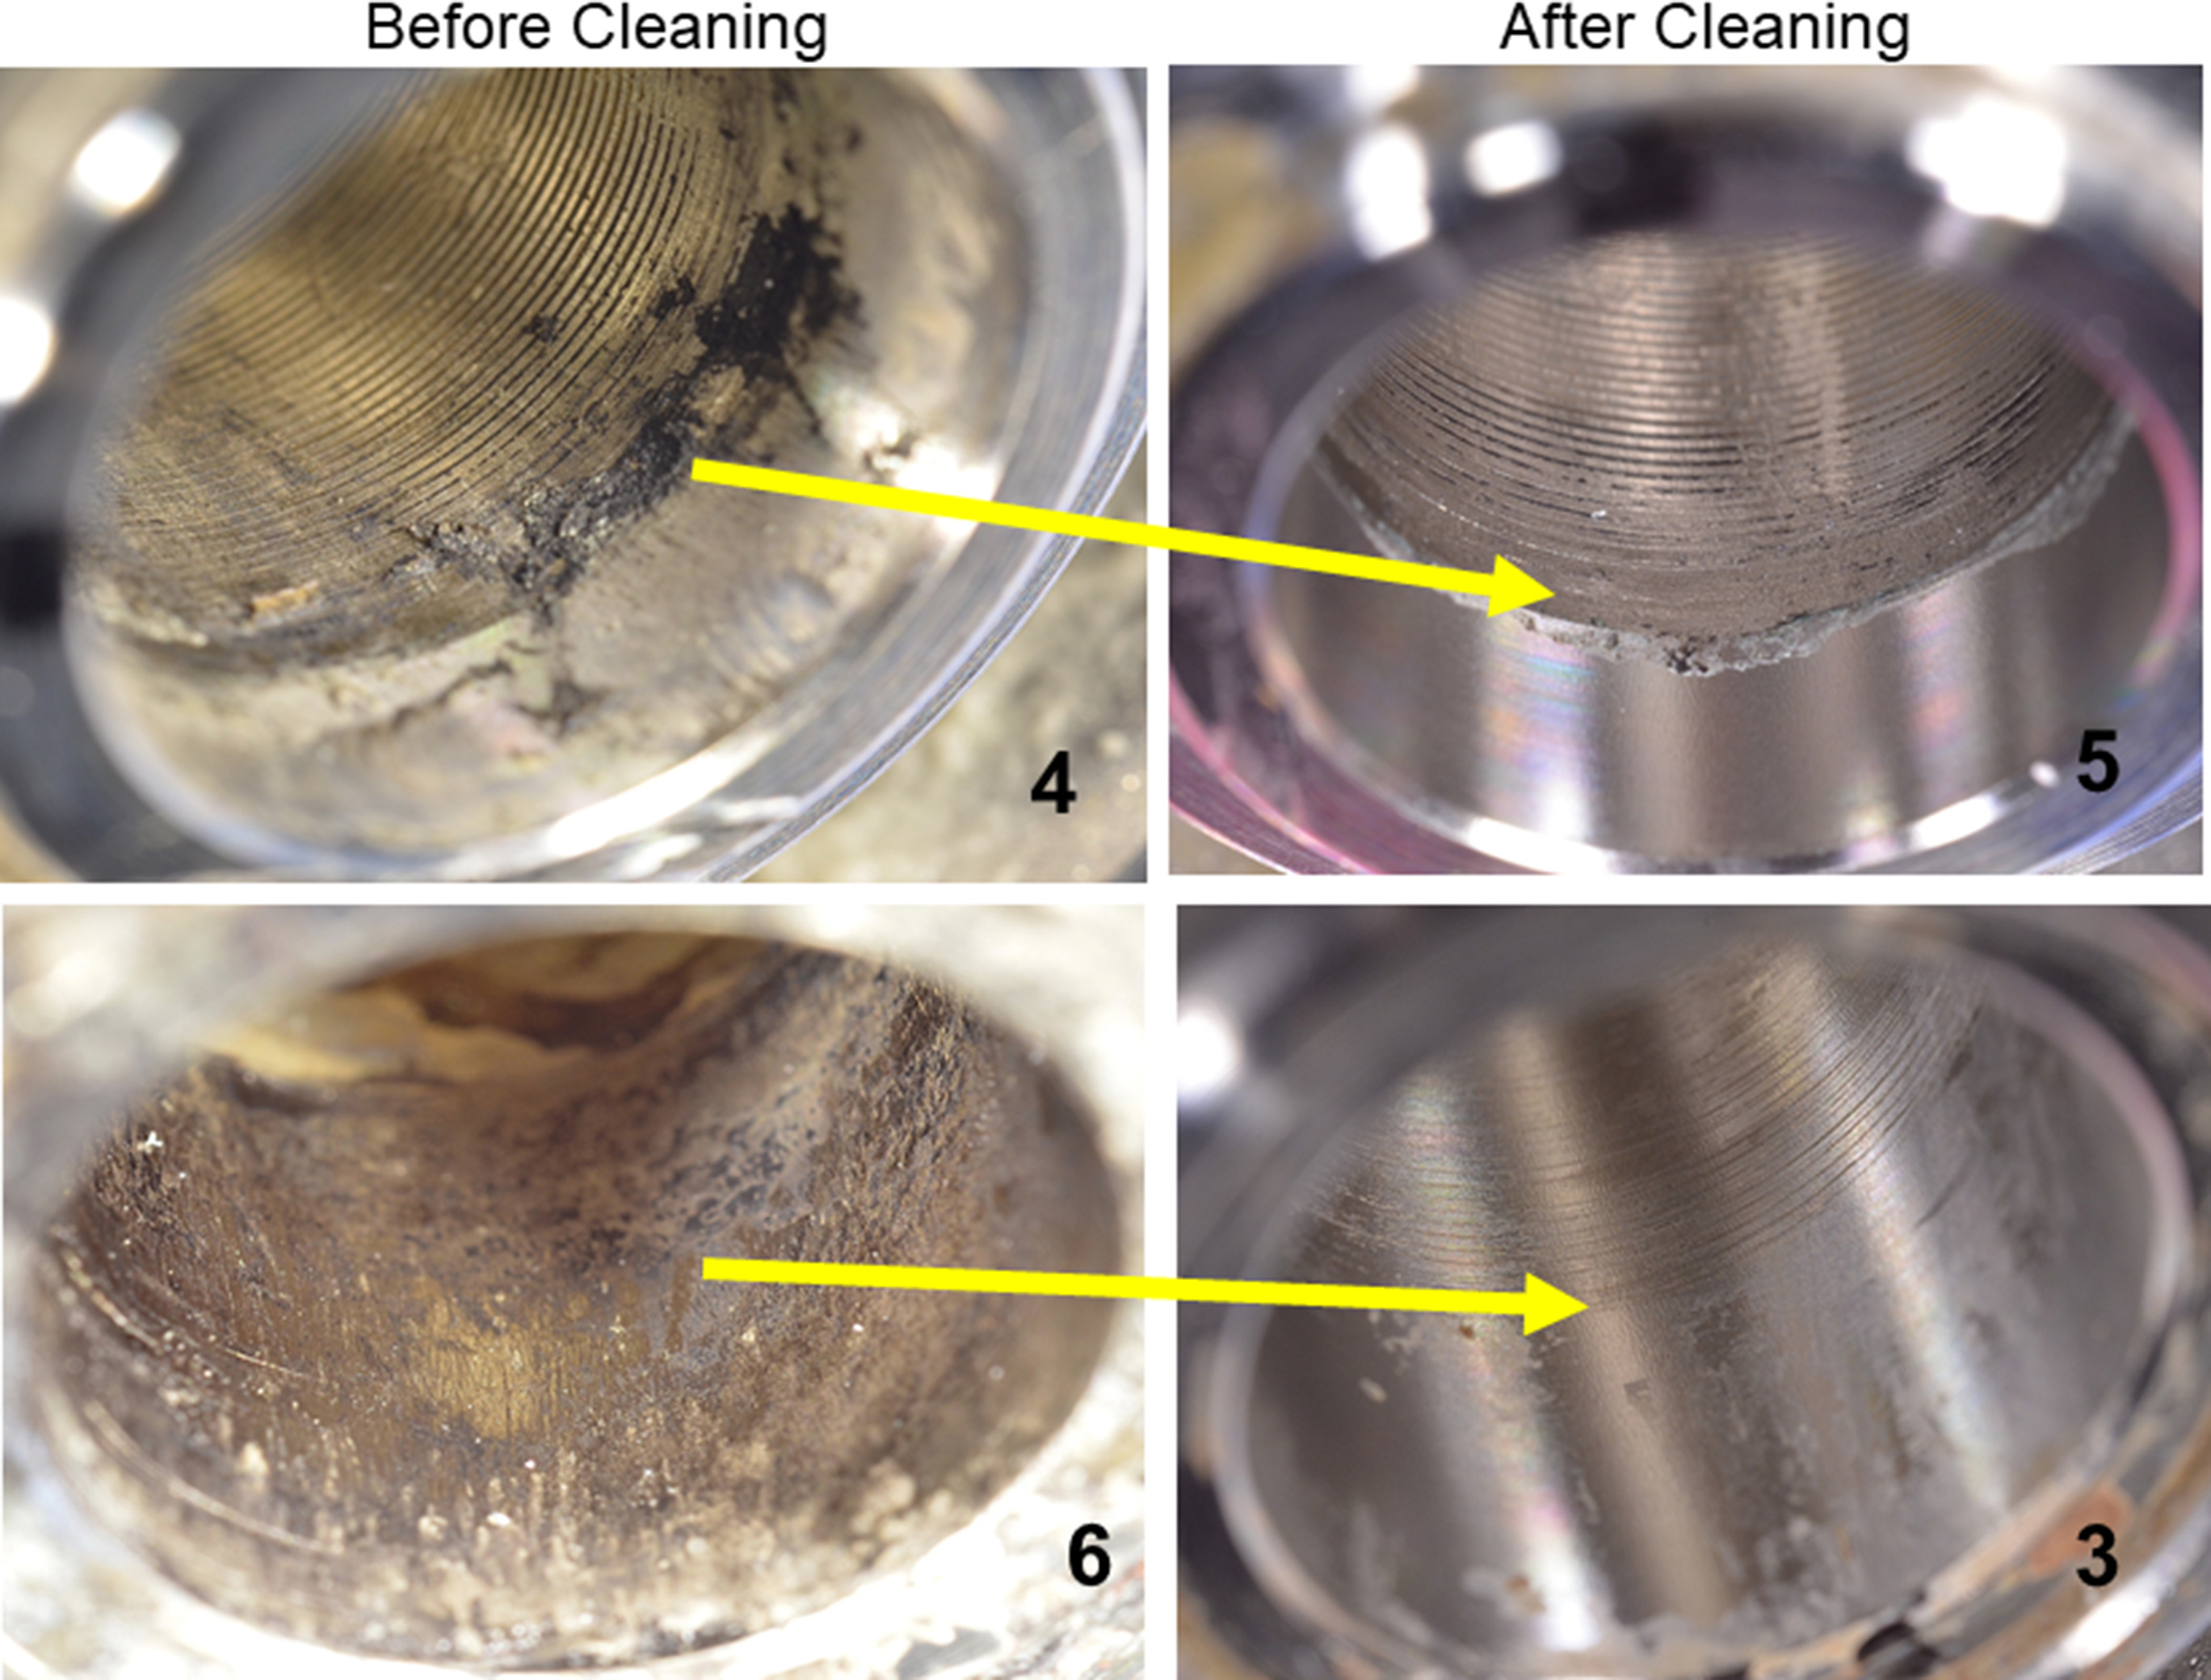 Fig. 4 
            Two examples of corrosive damage and their relative scores assigned before and after cleaning are presented. On the top row, prior to cleaning (left) the taper was assessed as a 4, using both grading scores. However, after cleaning (right), most of the dark deposits were removed, and the new Goldberg score remained the same, yet the visual grading system (VGS) score increased to a 5, due to the presence of significant, localized material loss. In contrast, on the bottom row, prior to cleaning (left) the taper was assessed as a 4 using the Goldberg score, but a 6 using the VGS, due to the extent of the thick, black deposit obscuring more than 50% of the surface. However, after cleaning (right) most of the dark deposits were removed, which changed the scores using both methods of scoring to a 3. The number in the figures indicates VGS grading score only (maximum opening at the distal taper sleeve is 14 mm).
          